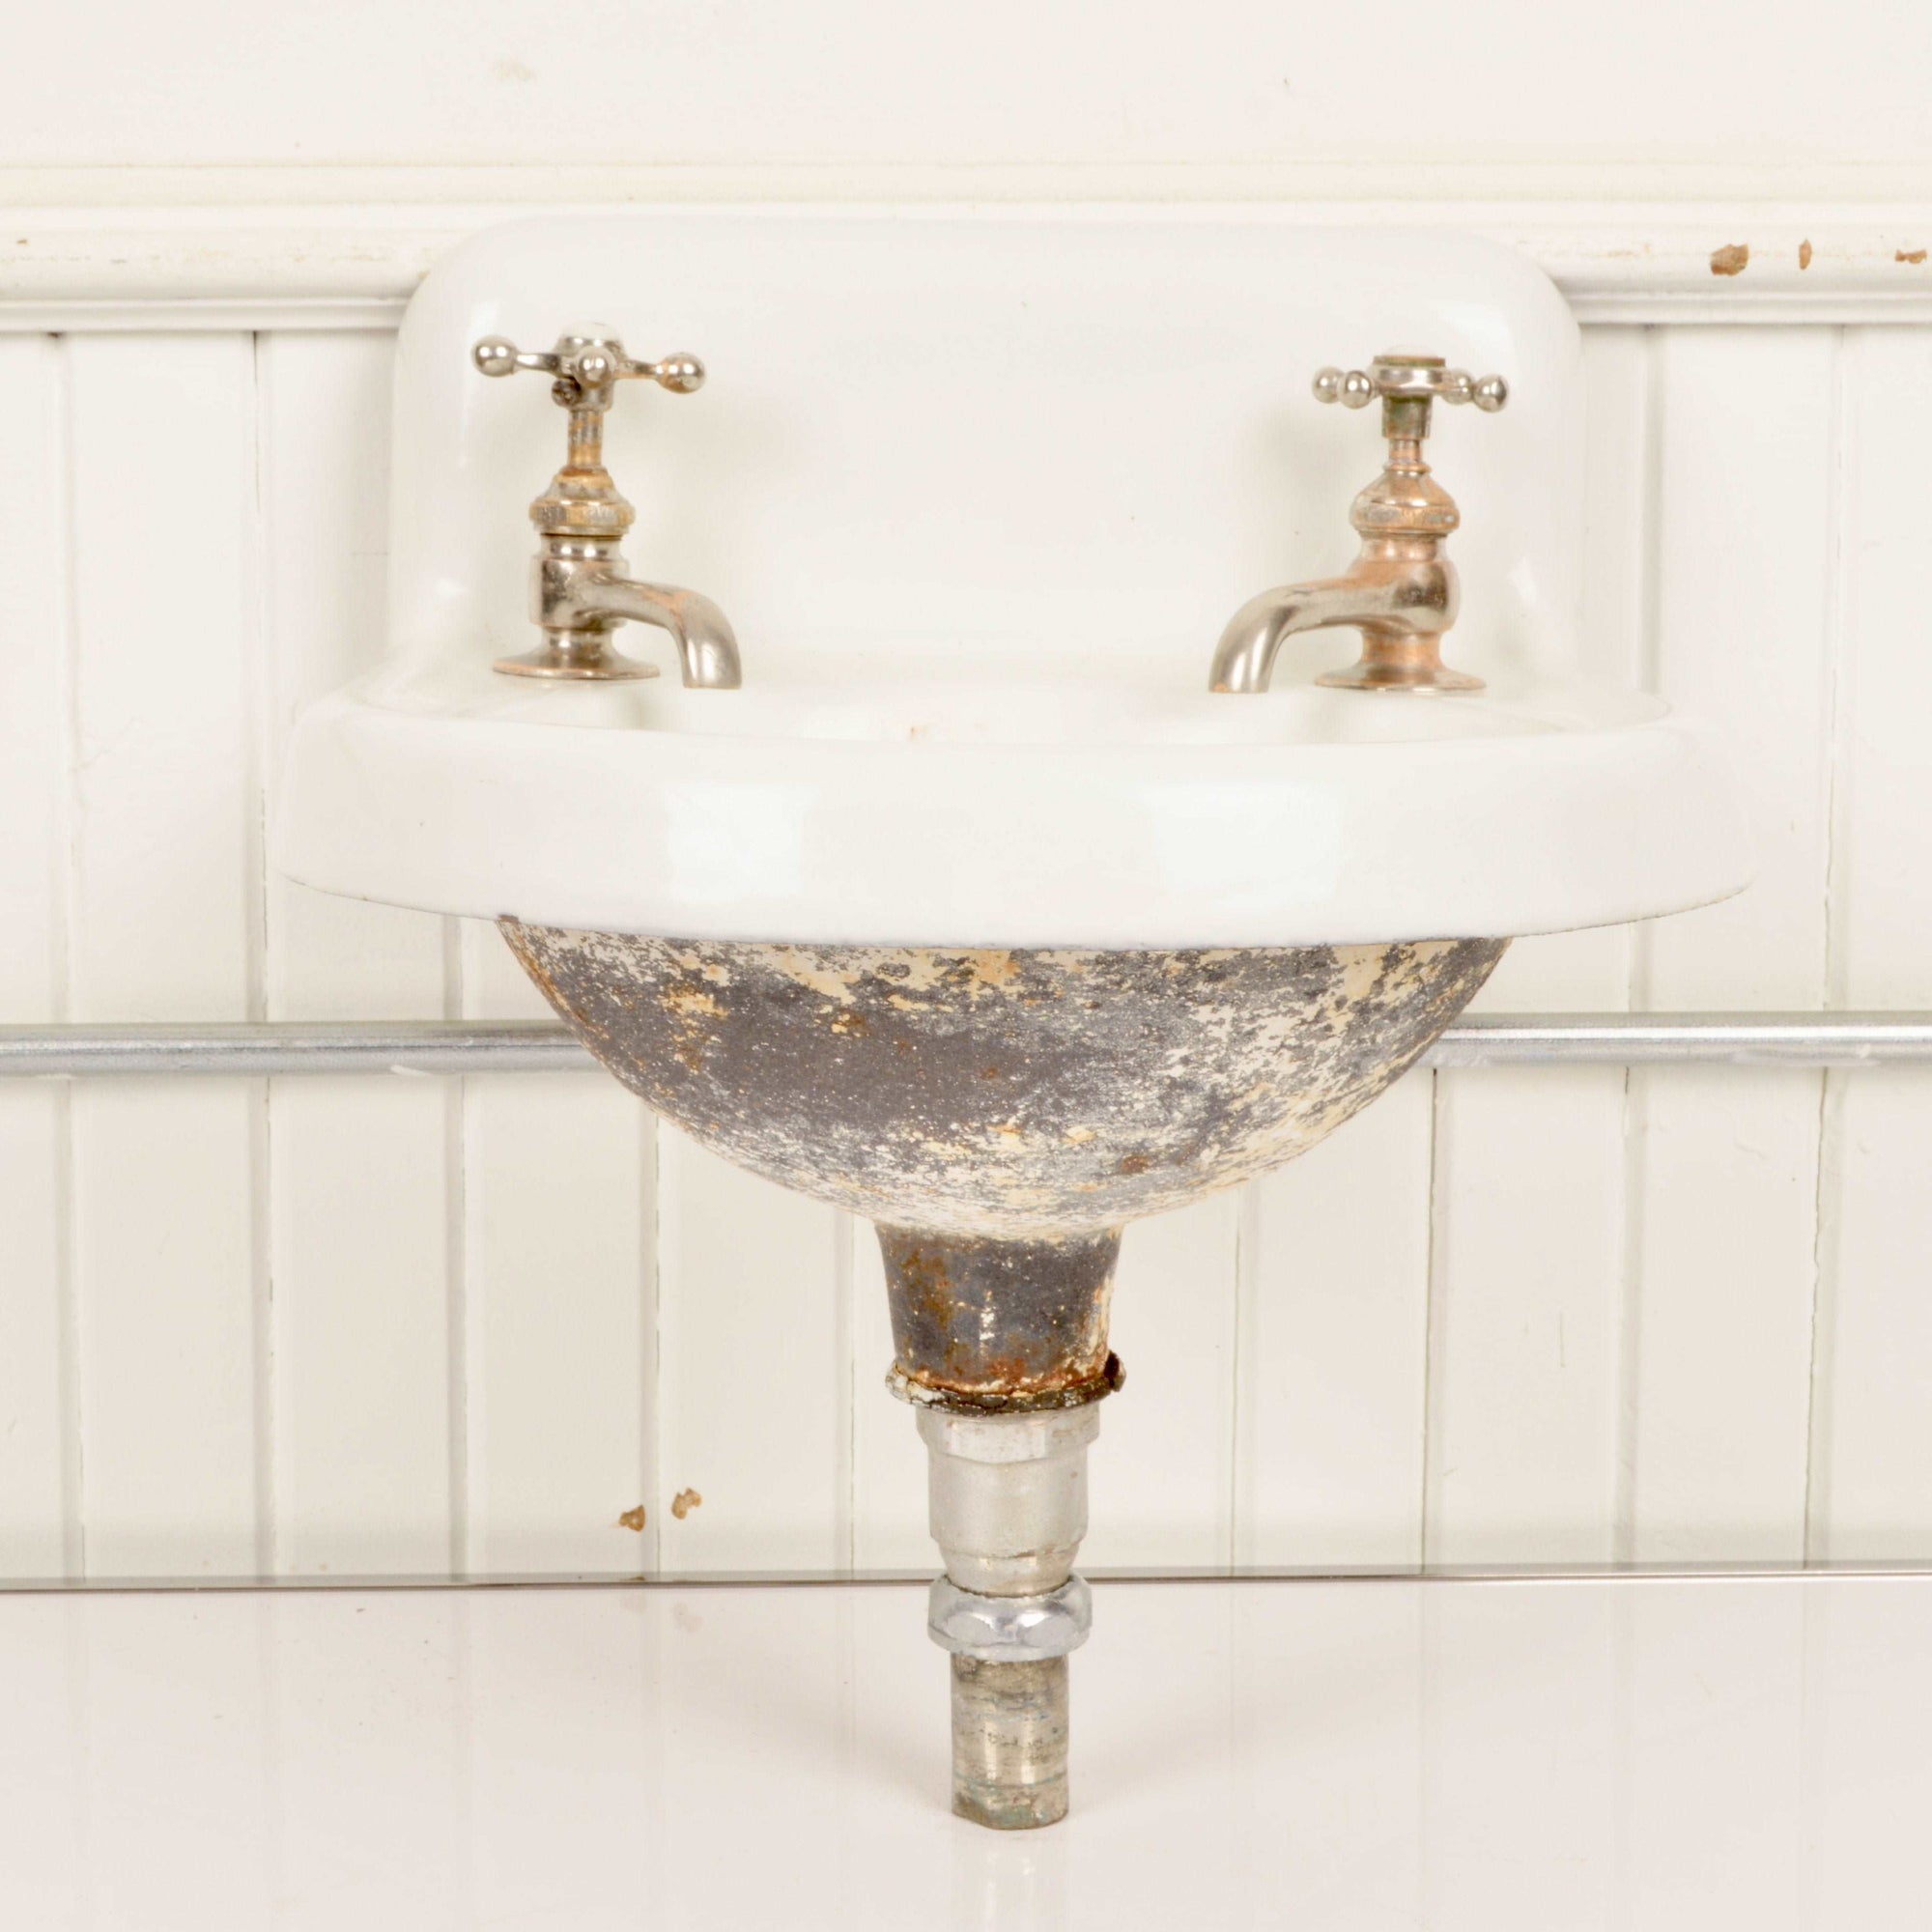 Antique Cast Iron Enamel Sink With Mismatched Faucets Salvage-Garden